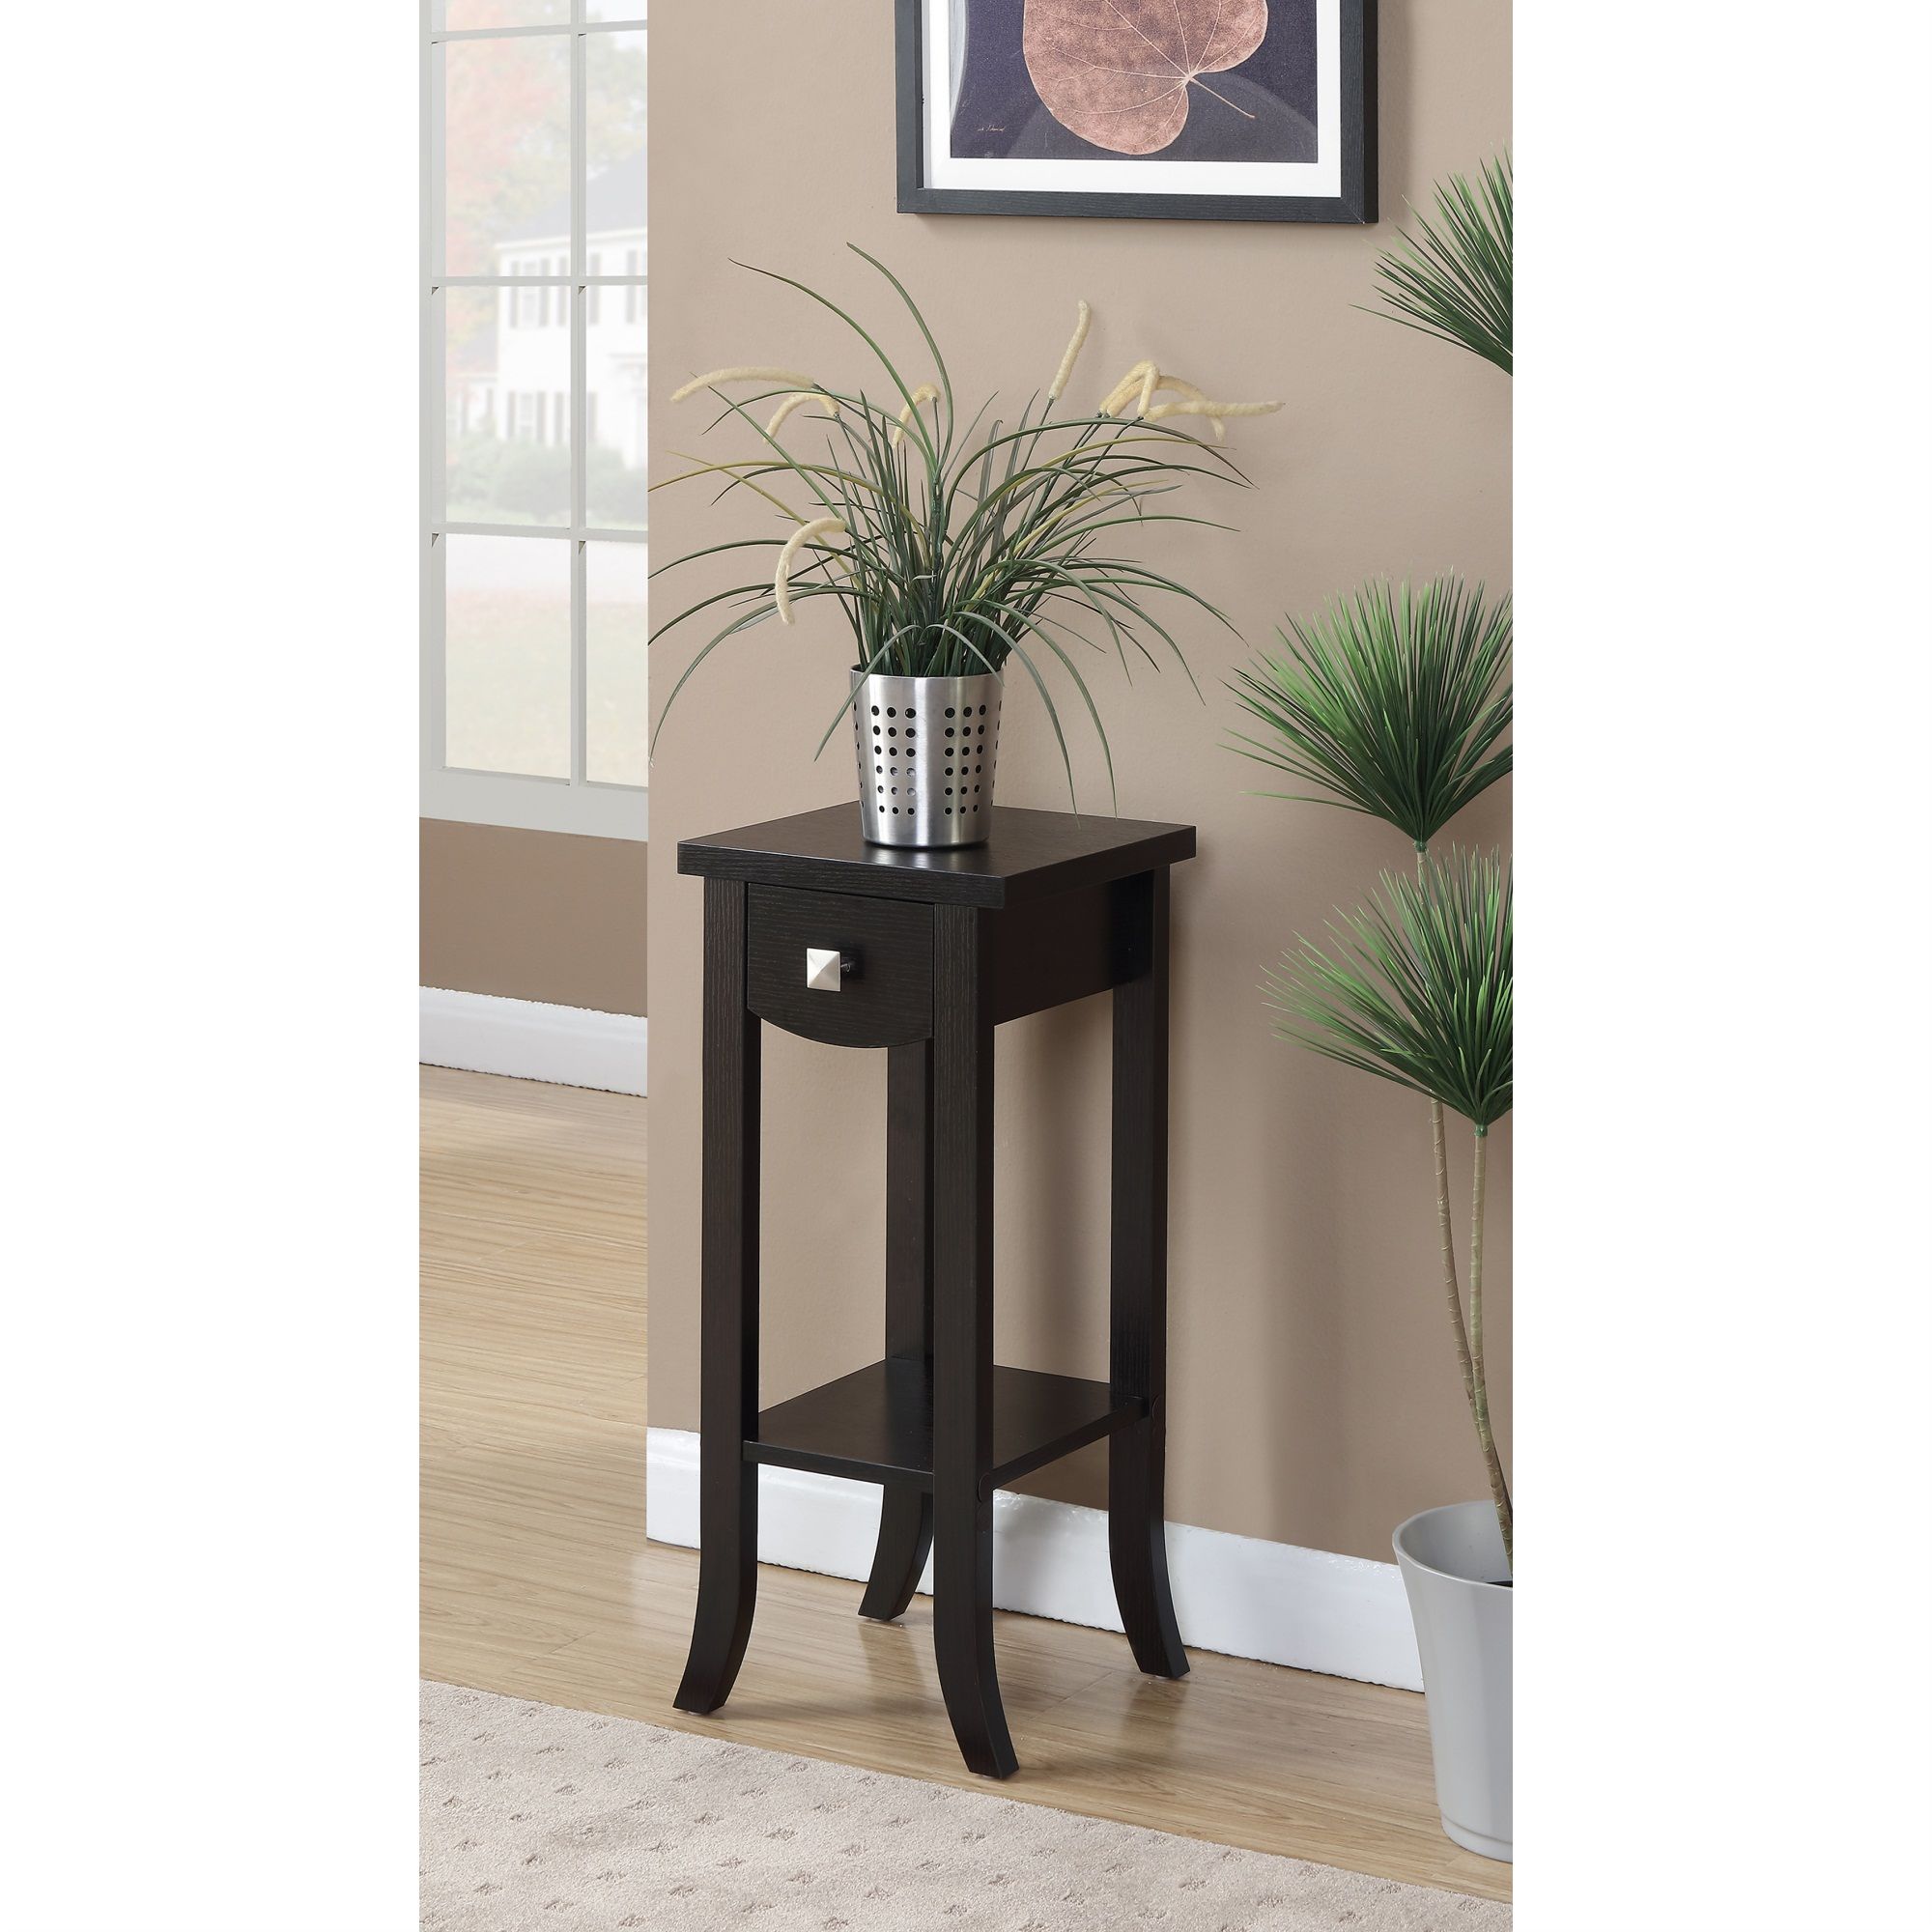 Newport Prism Medium Plant Stand – Walmart With Medium Plant Stands (View 12 of 15)